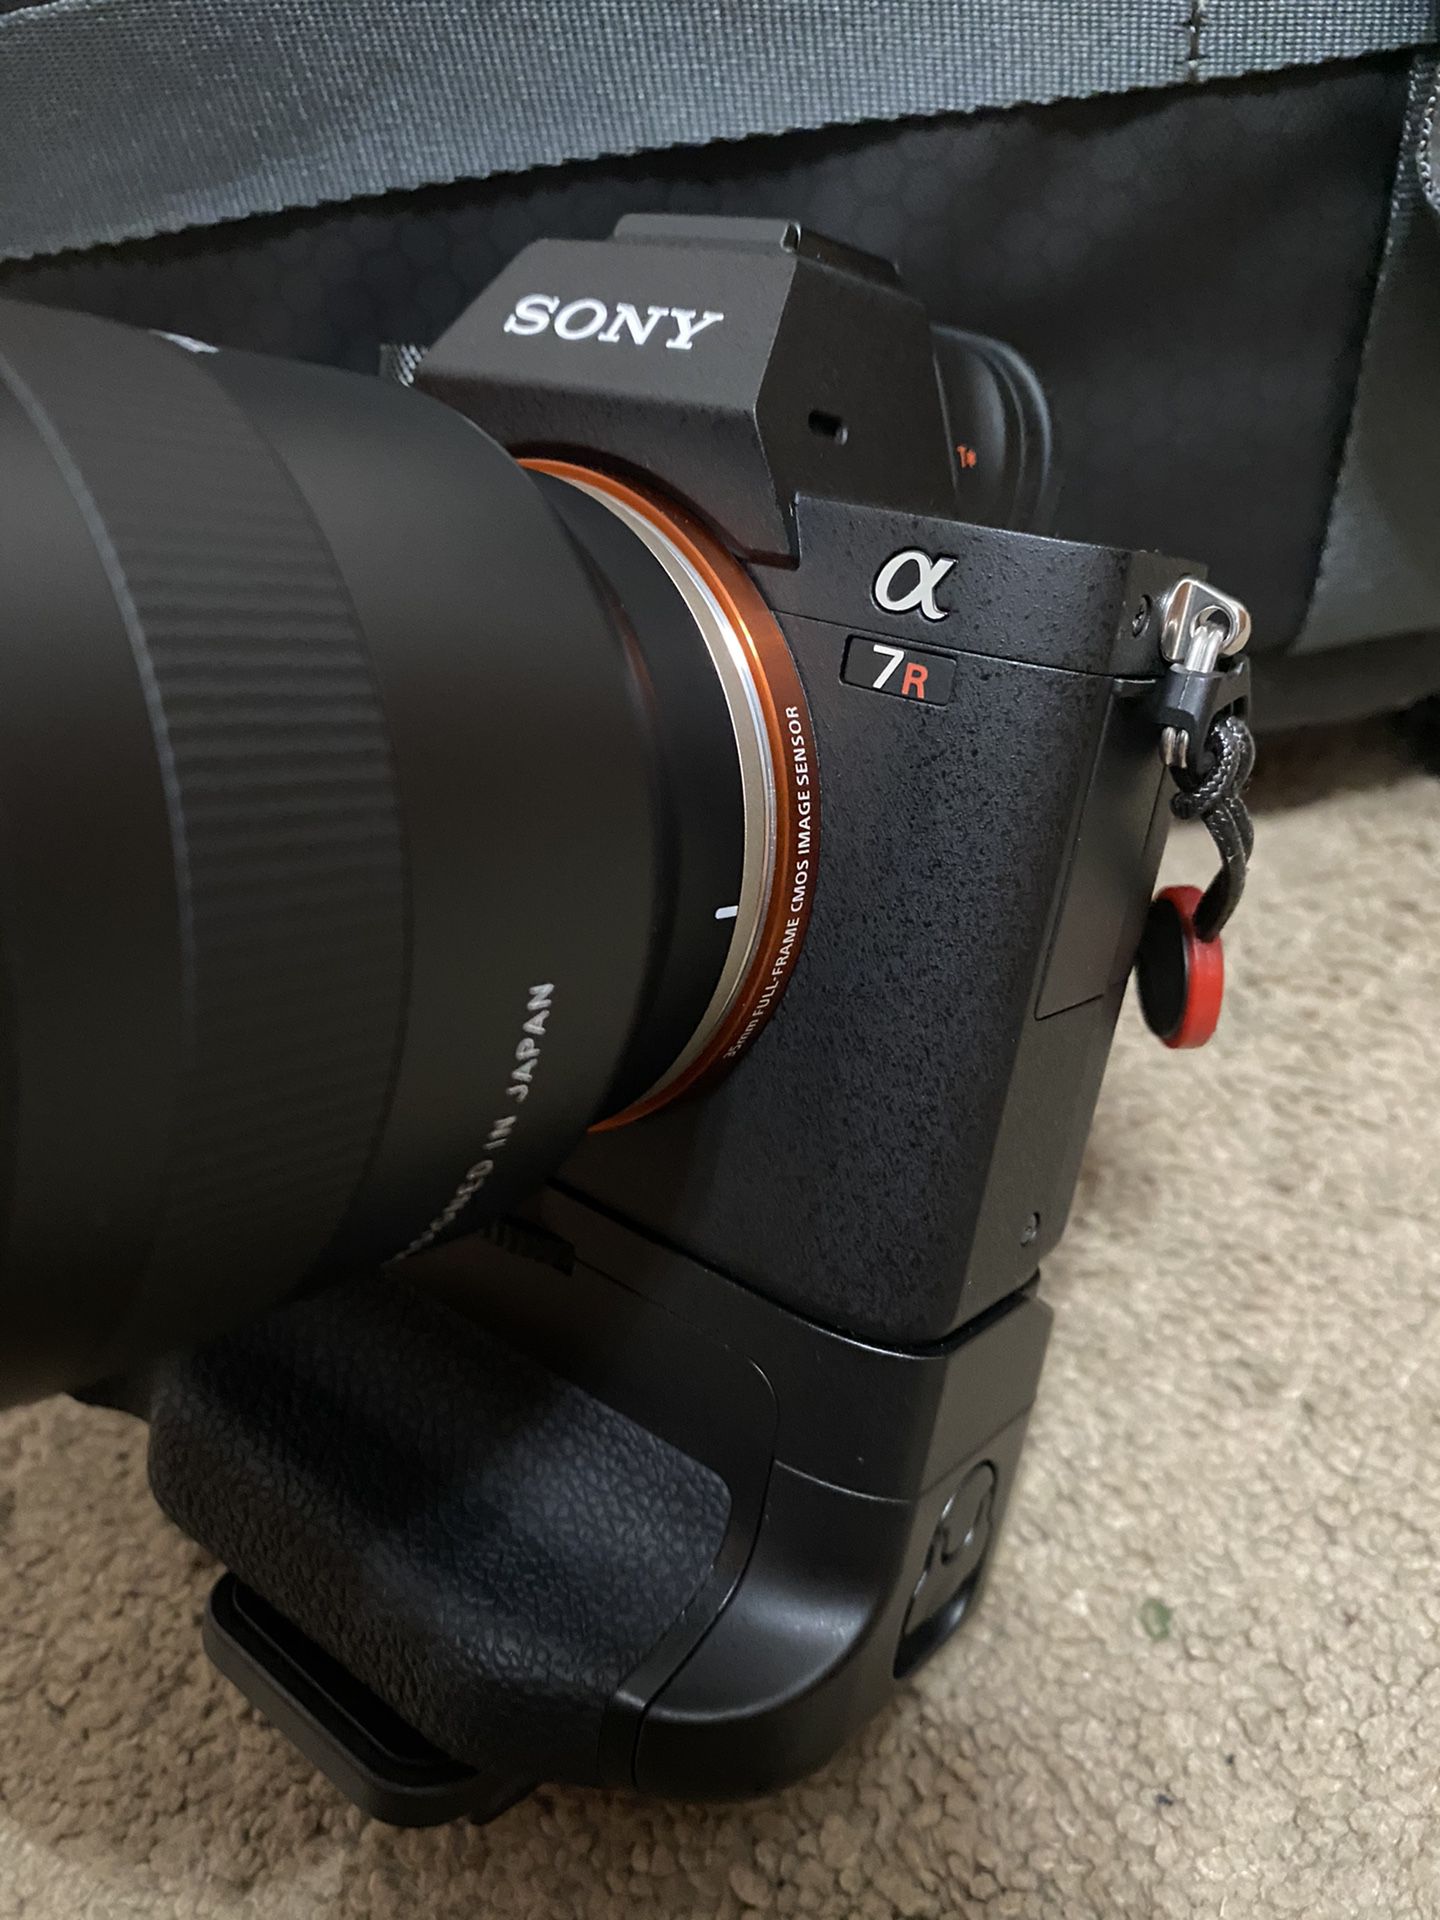 Sony A7Rii with all accessories